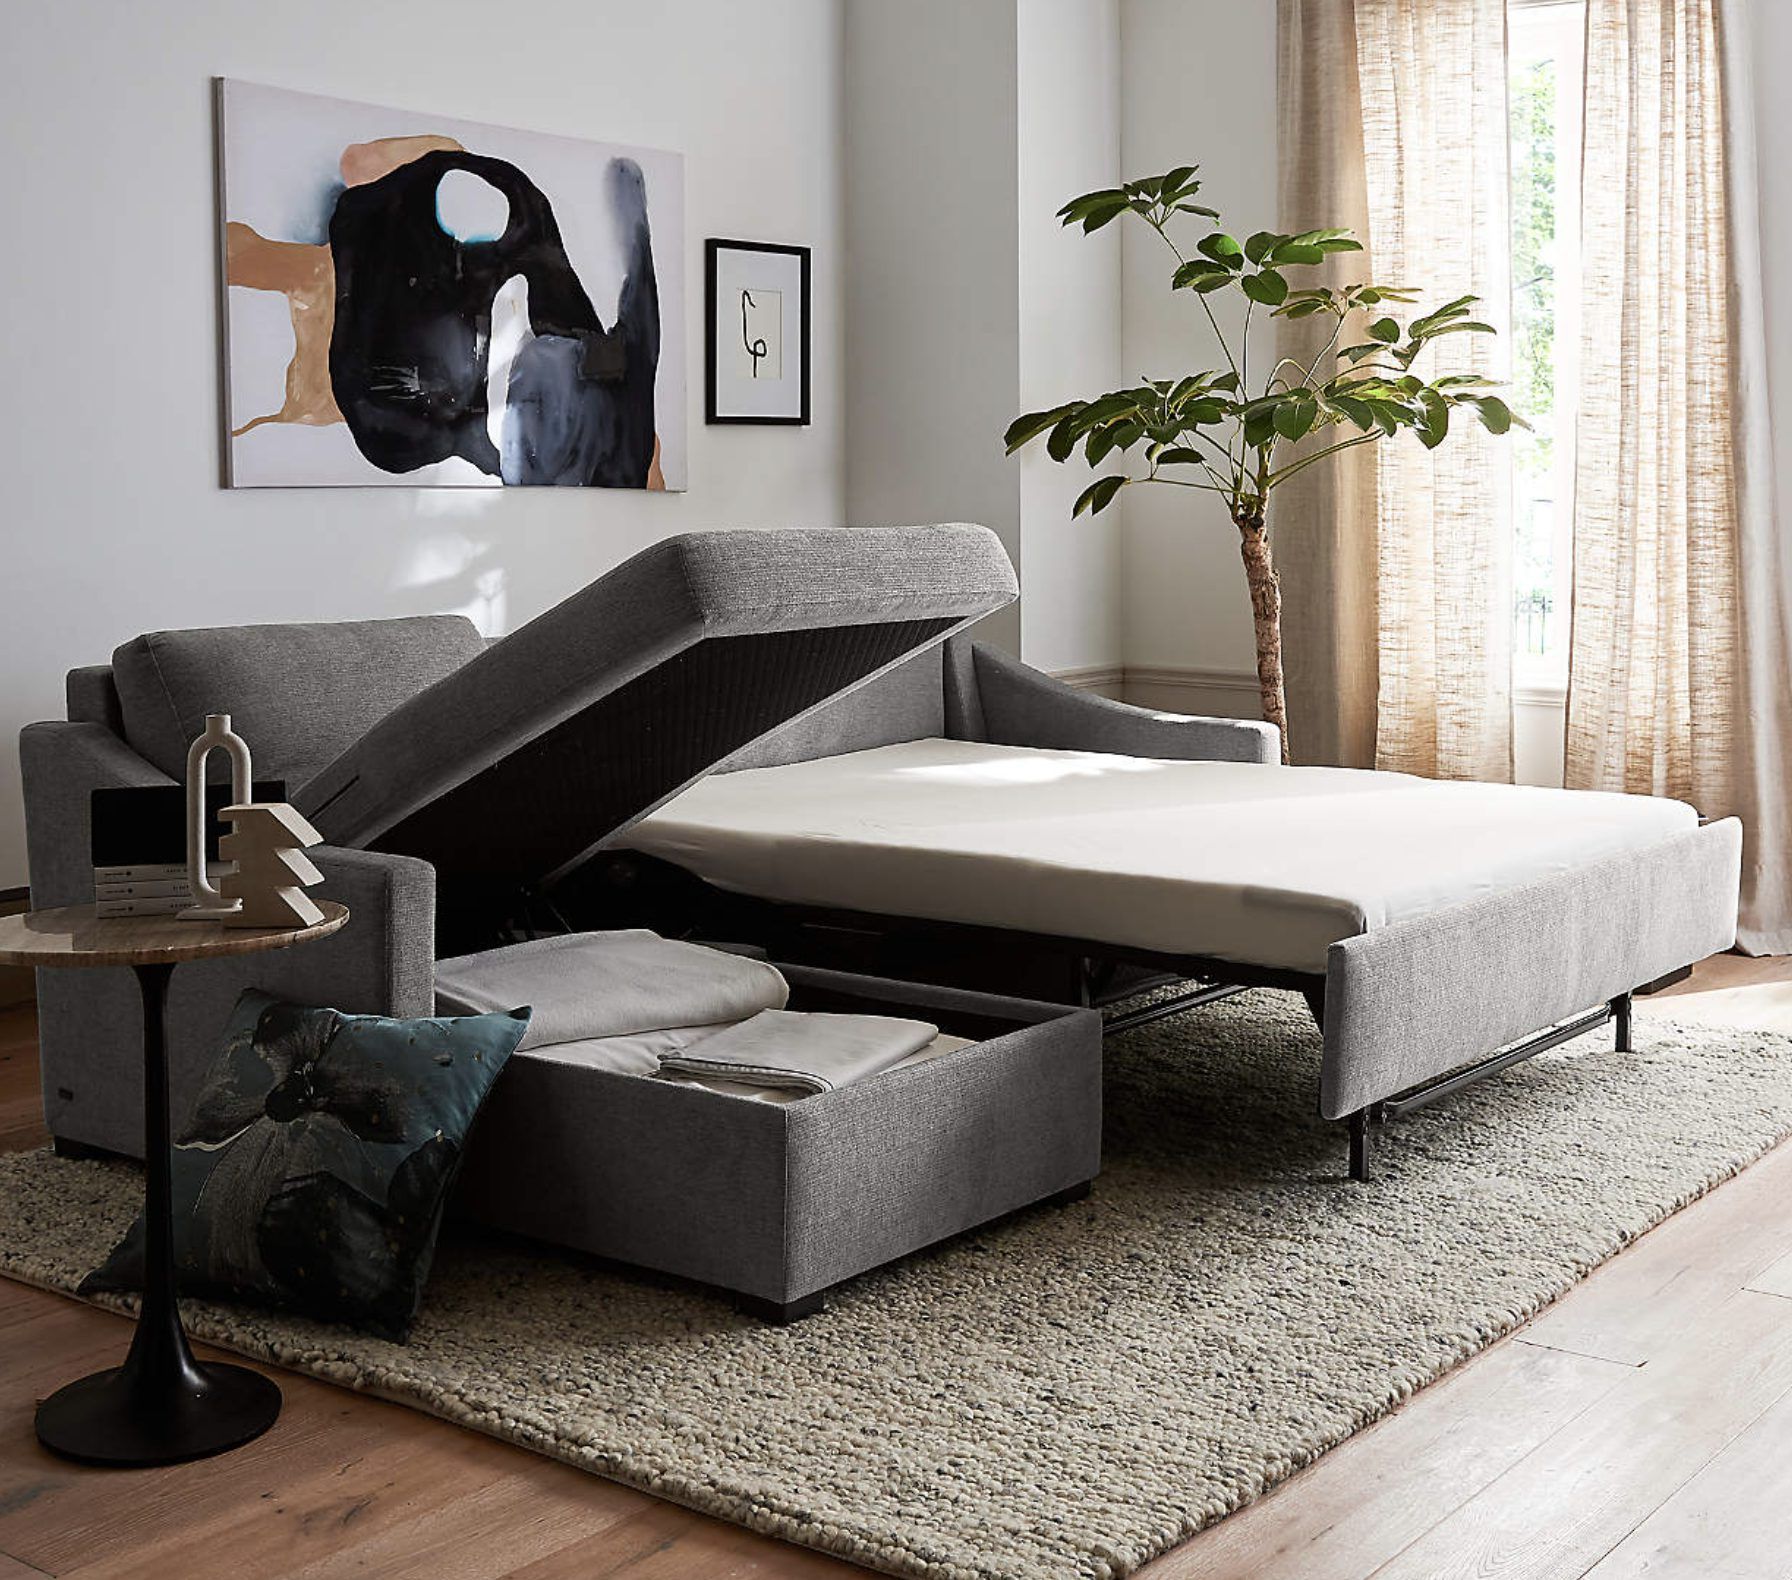 27 Of The Best Sectional Couches With Pull Out Beds In 2023 – Happily  Inspired With Regard To U Shaped Sectional Sofa With Pull Out Bed (View 16 of 20)